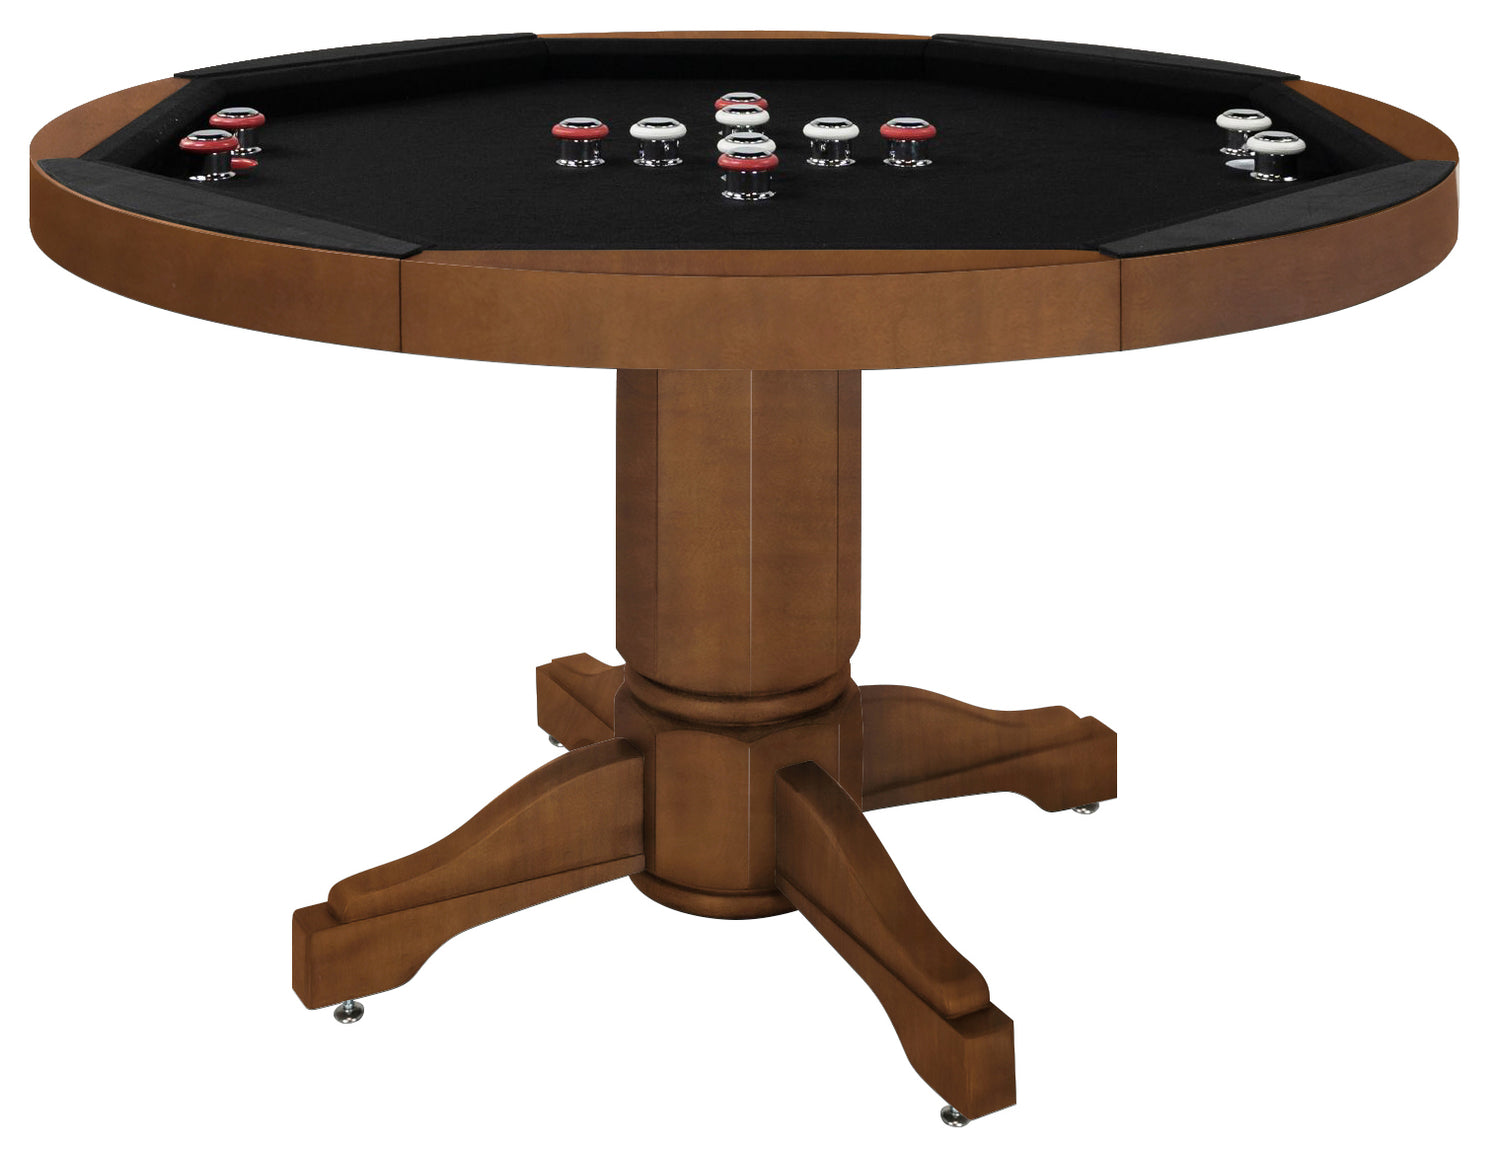 Legacy Billiards Heritage 3 in 1 Game Table with Poker, Dining and Bumper Pool in Walnut Finish